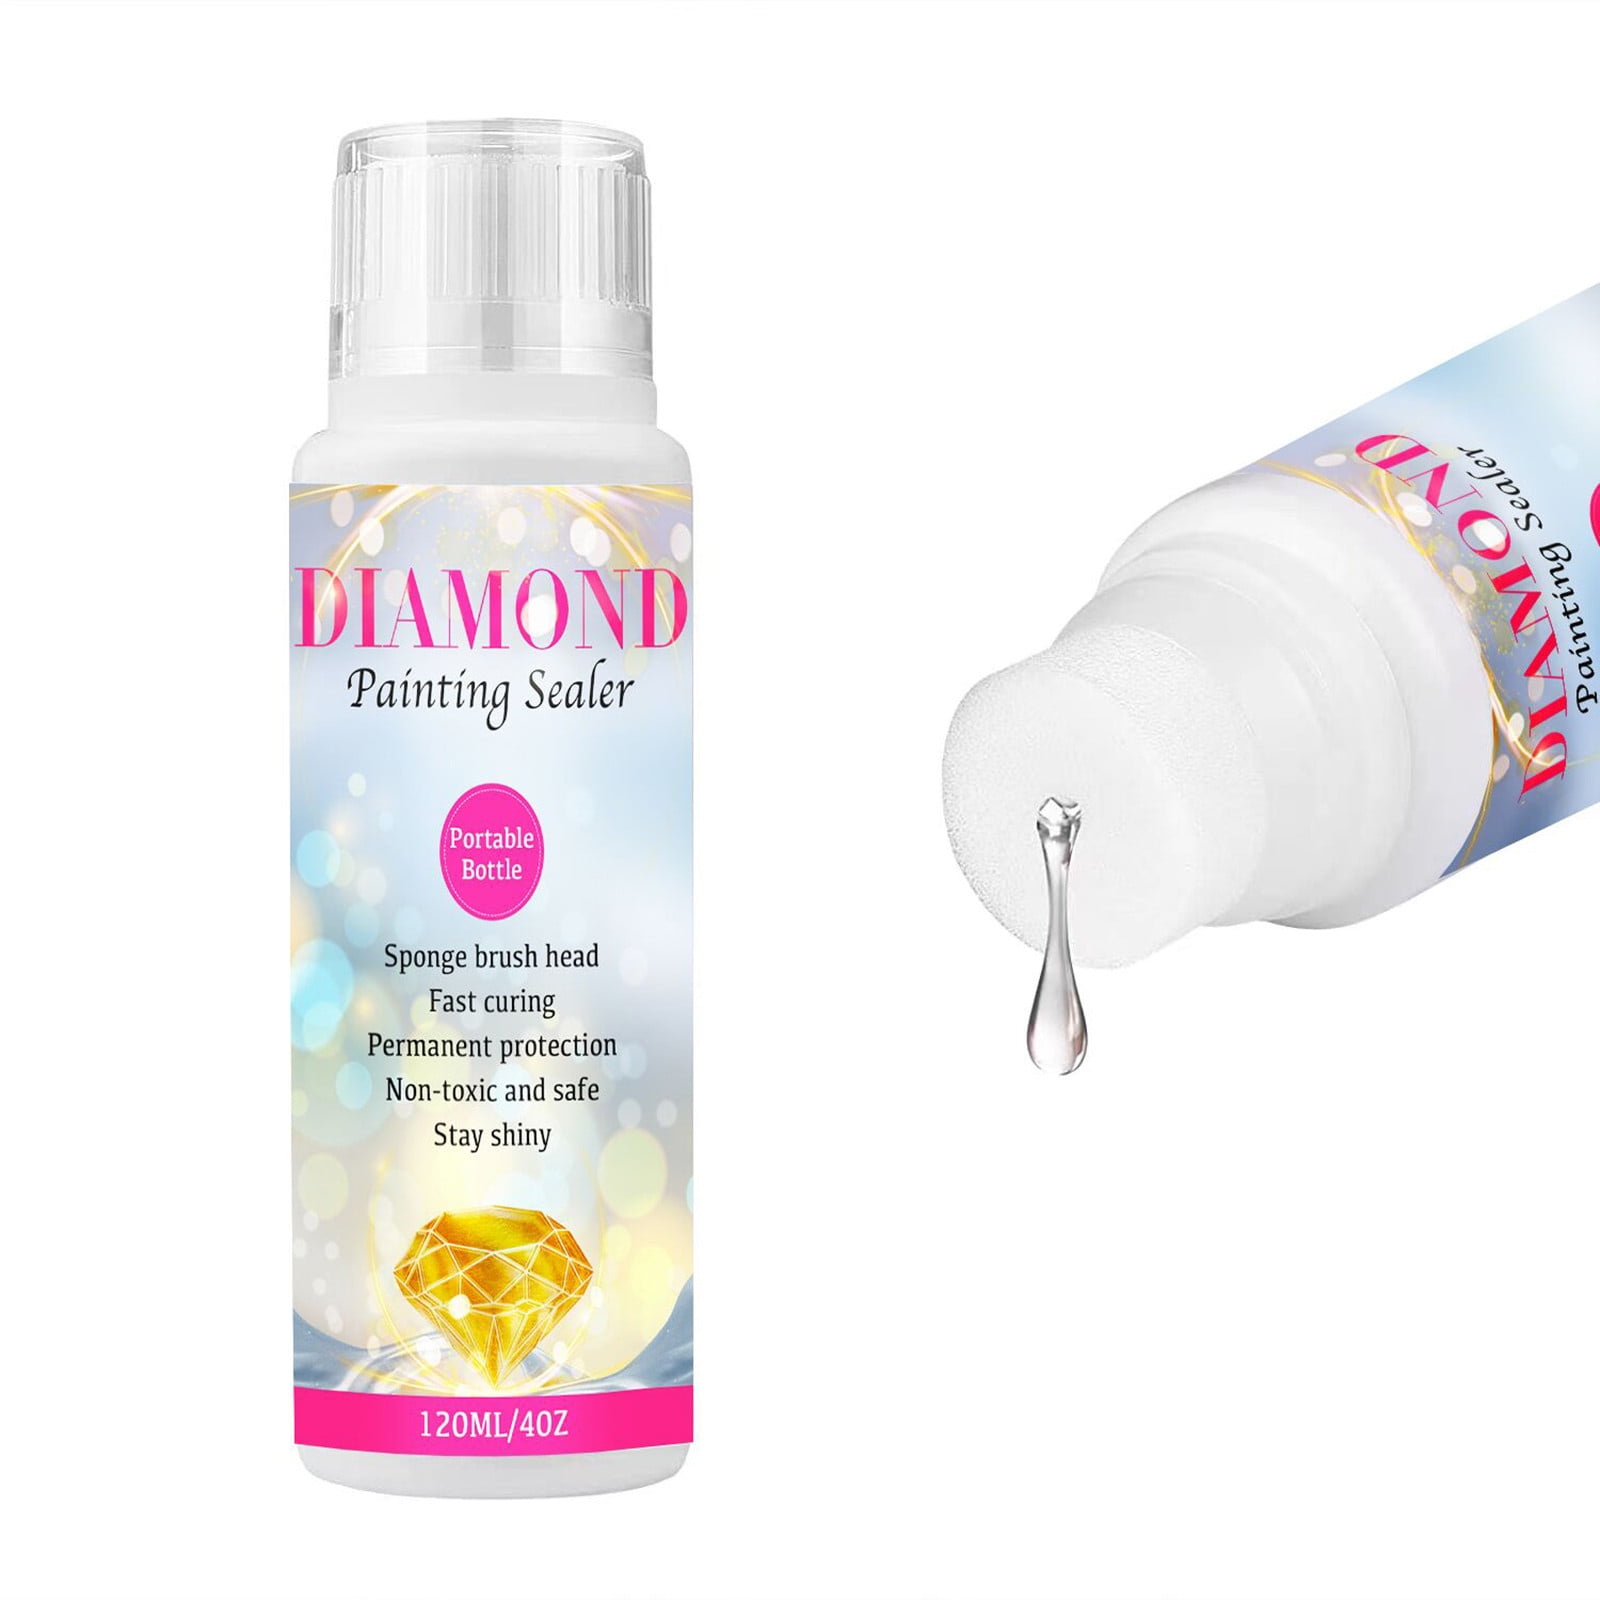 Haven't used it yet-I bought diamond painting sealer, but do I need it? I  want to get a folder to put my paintings in so I'm not sure if it's  necessary 